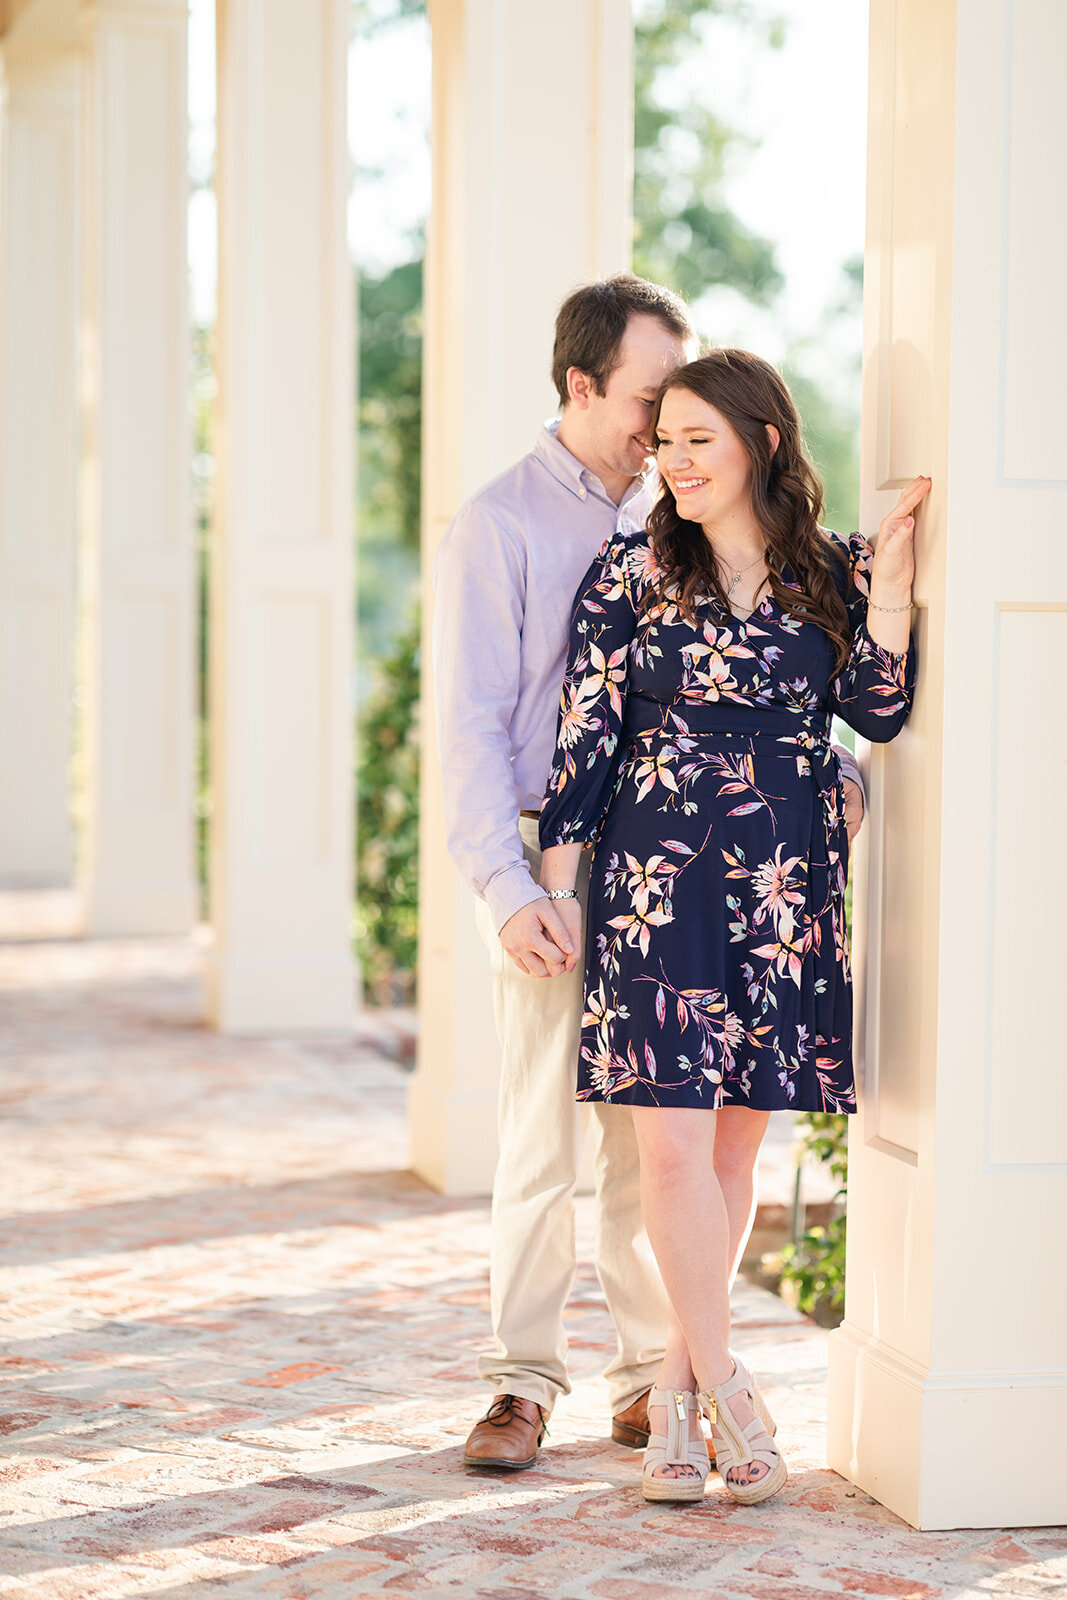 Engagement photo of couple on porch with columns